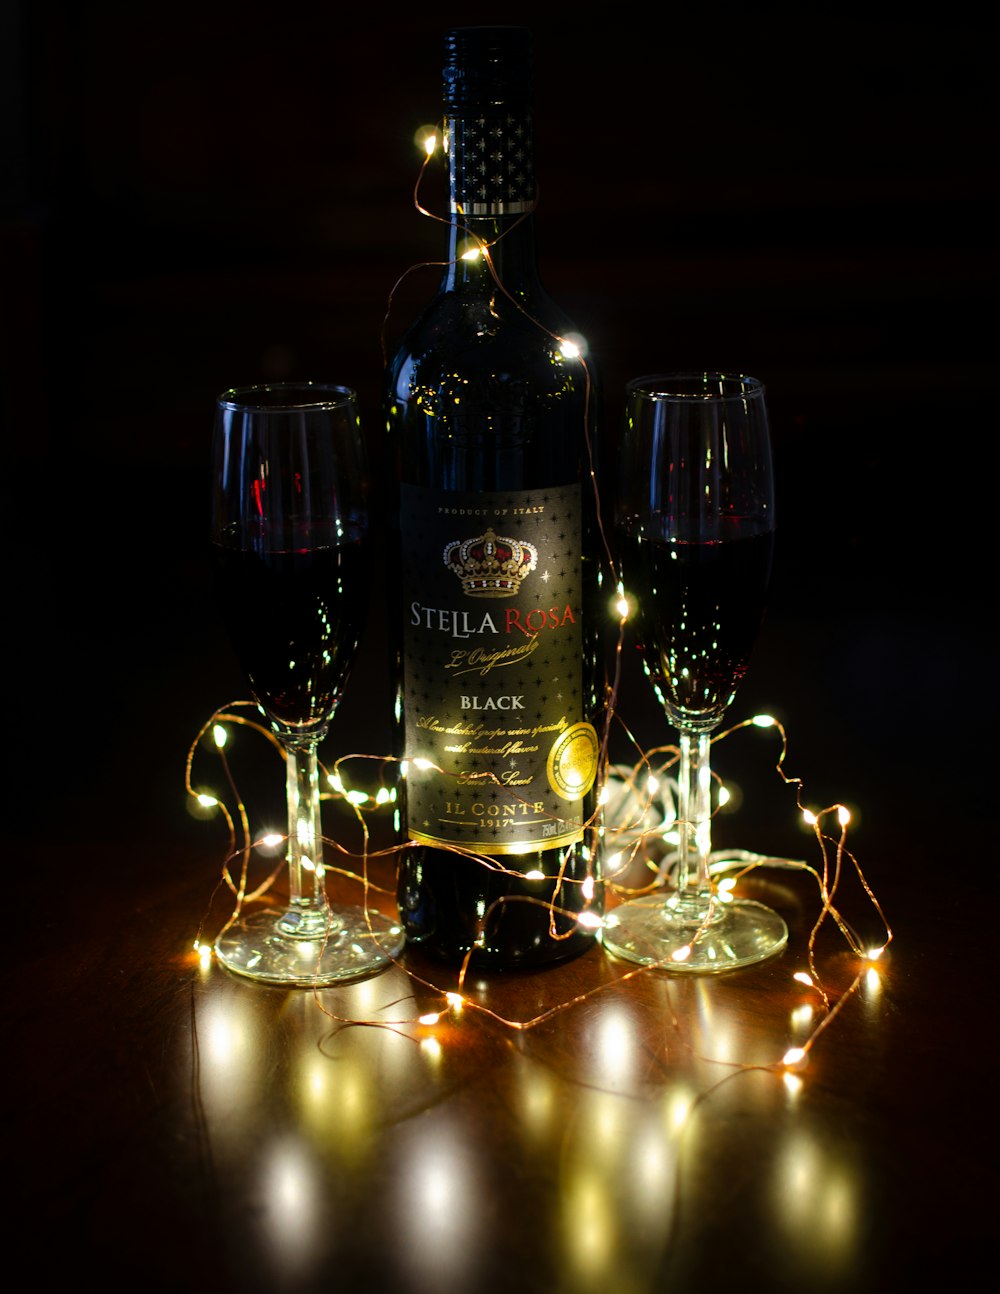 wine bottle with wine glass and wine glass on table